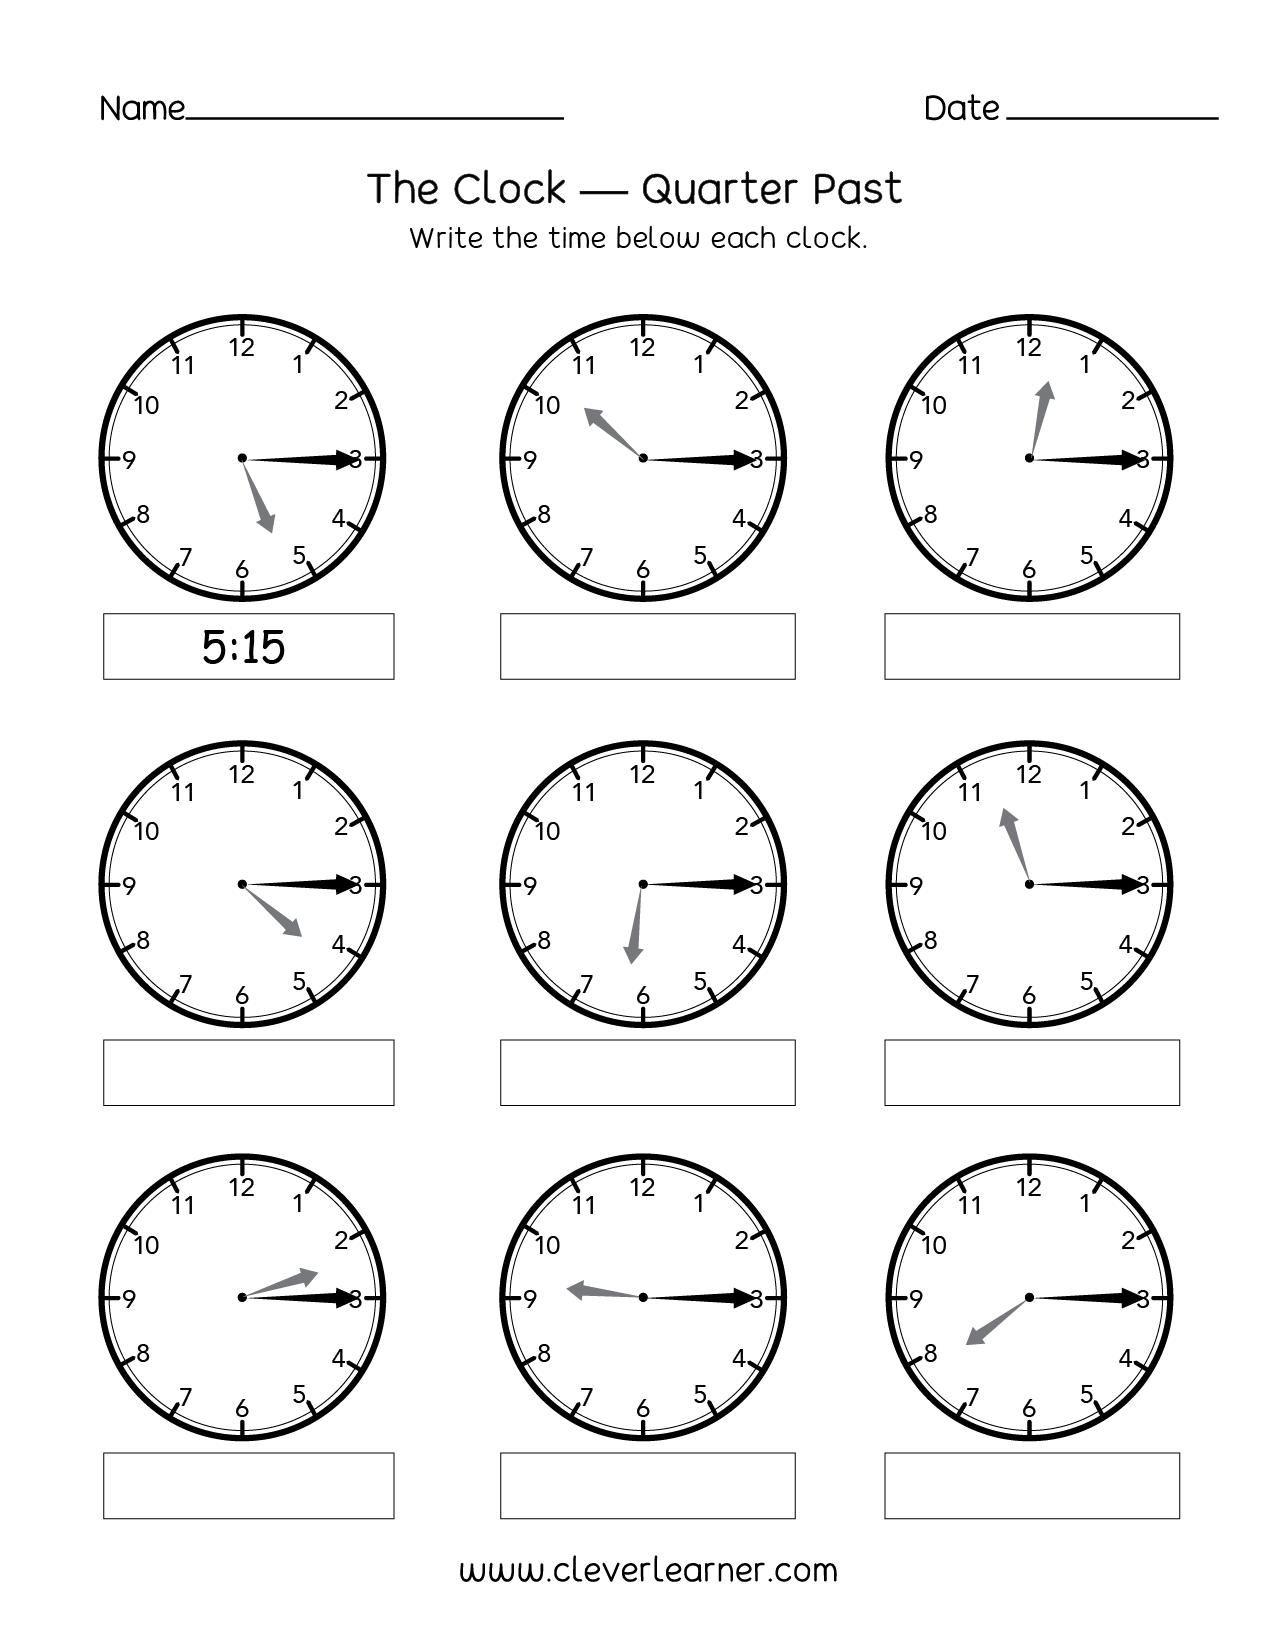 TELLING TIME PAST THE HOUR WORKSHEETS ON ANALOGUE TELLING TIME WORKSHEETS